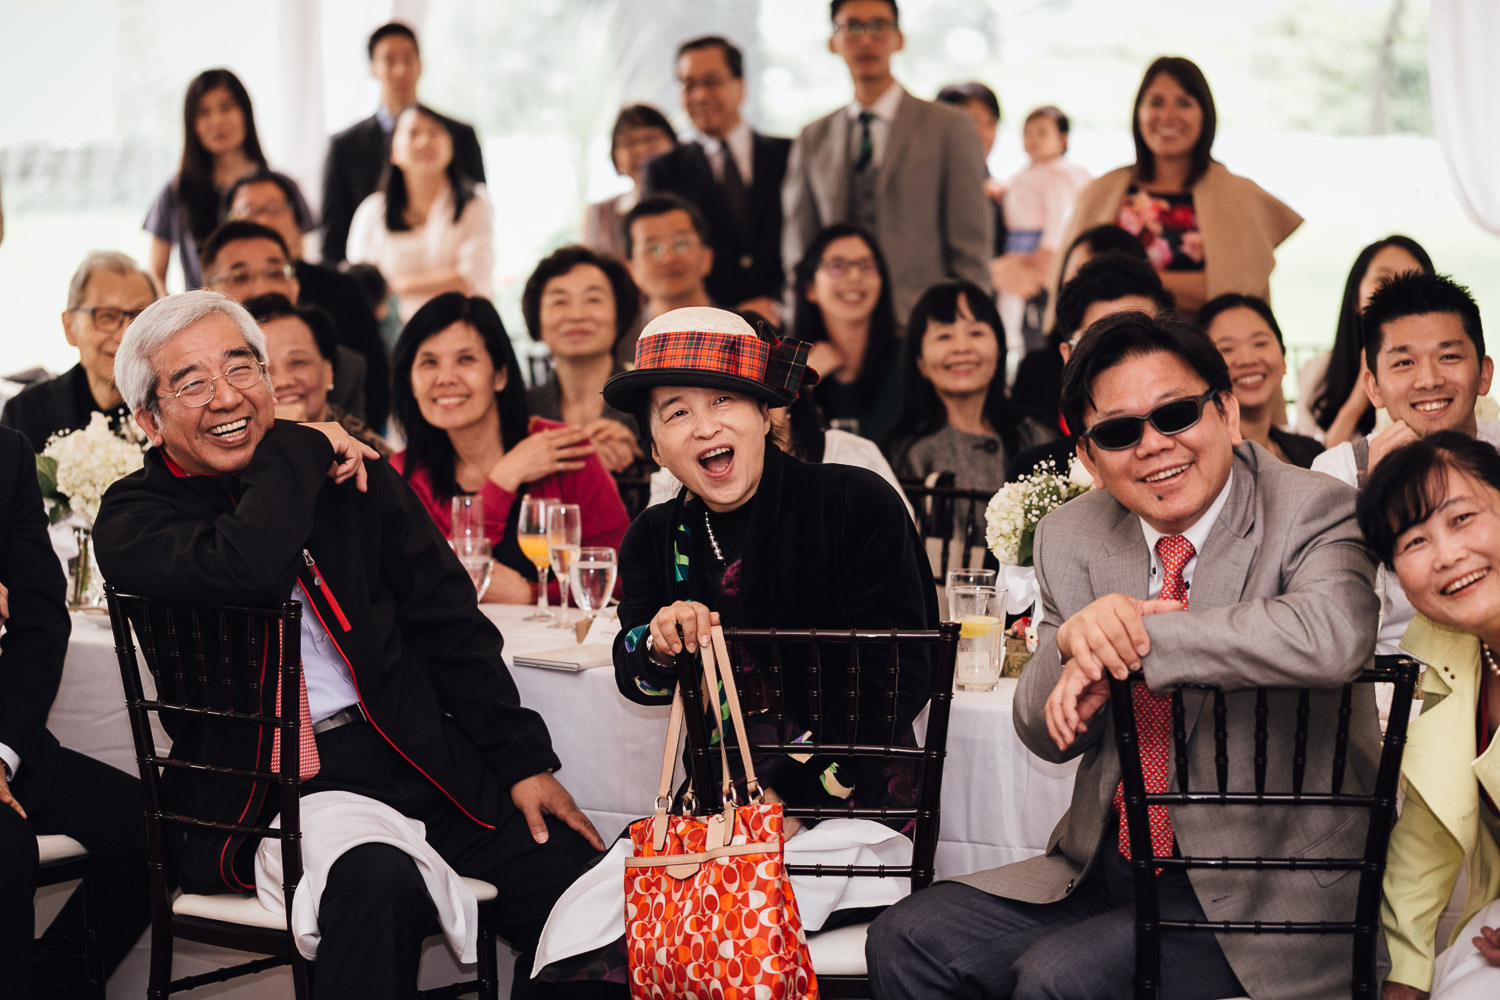 candid guest photography at brockhouse restaurant wedding reception in vancouver bc